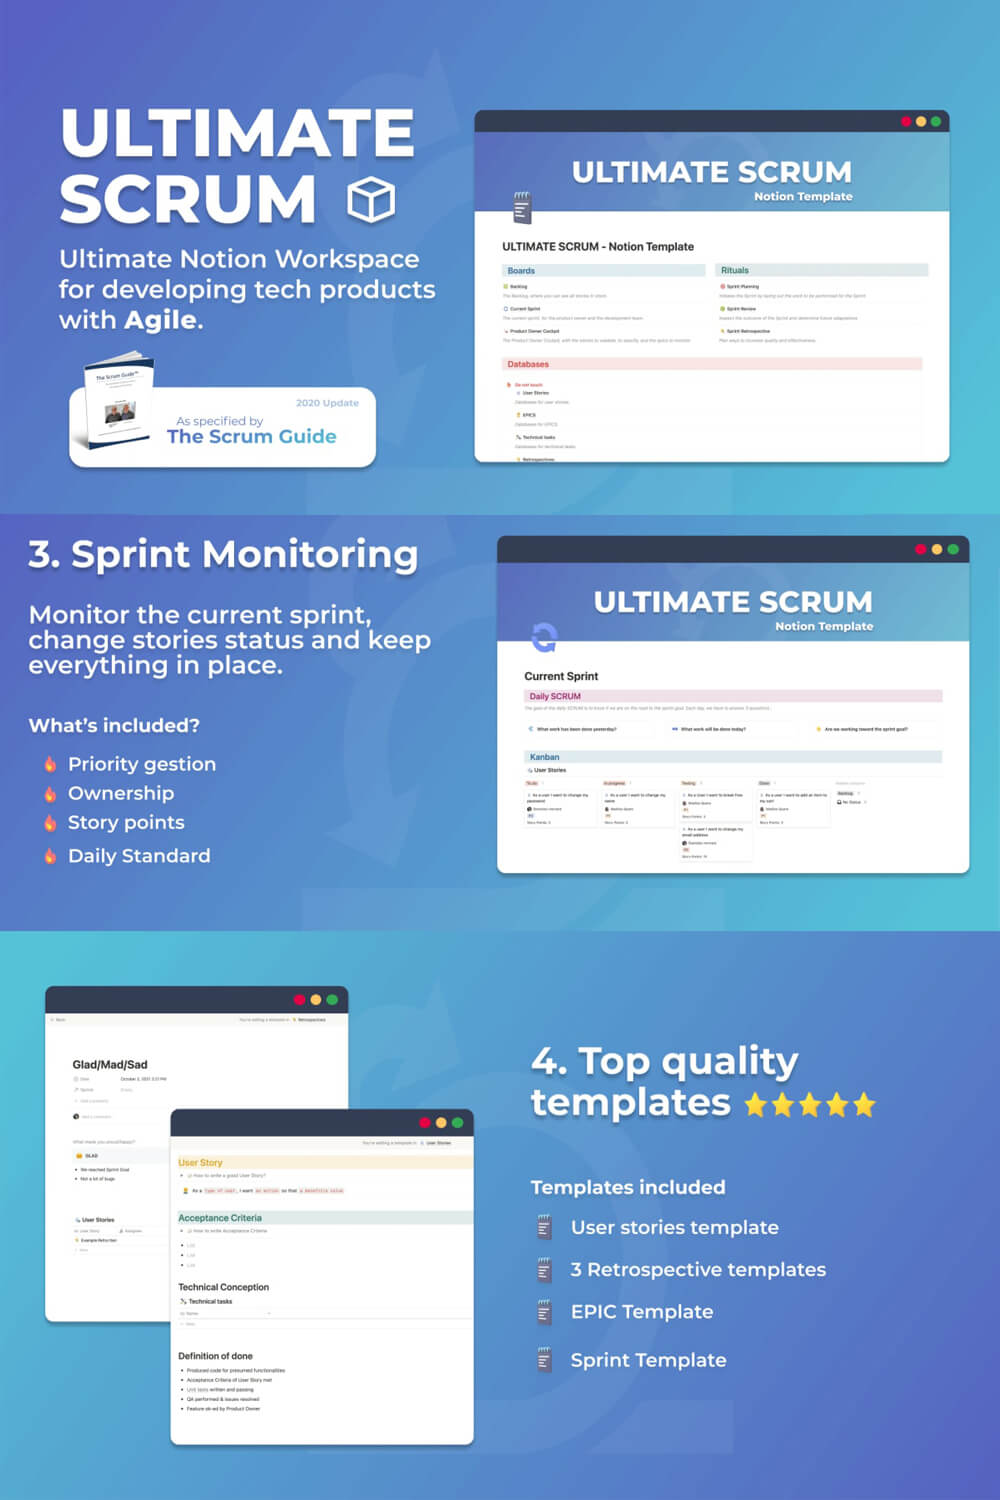 Examples Sprint Monitoring and Top quality templates.